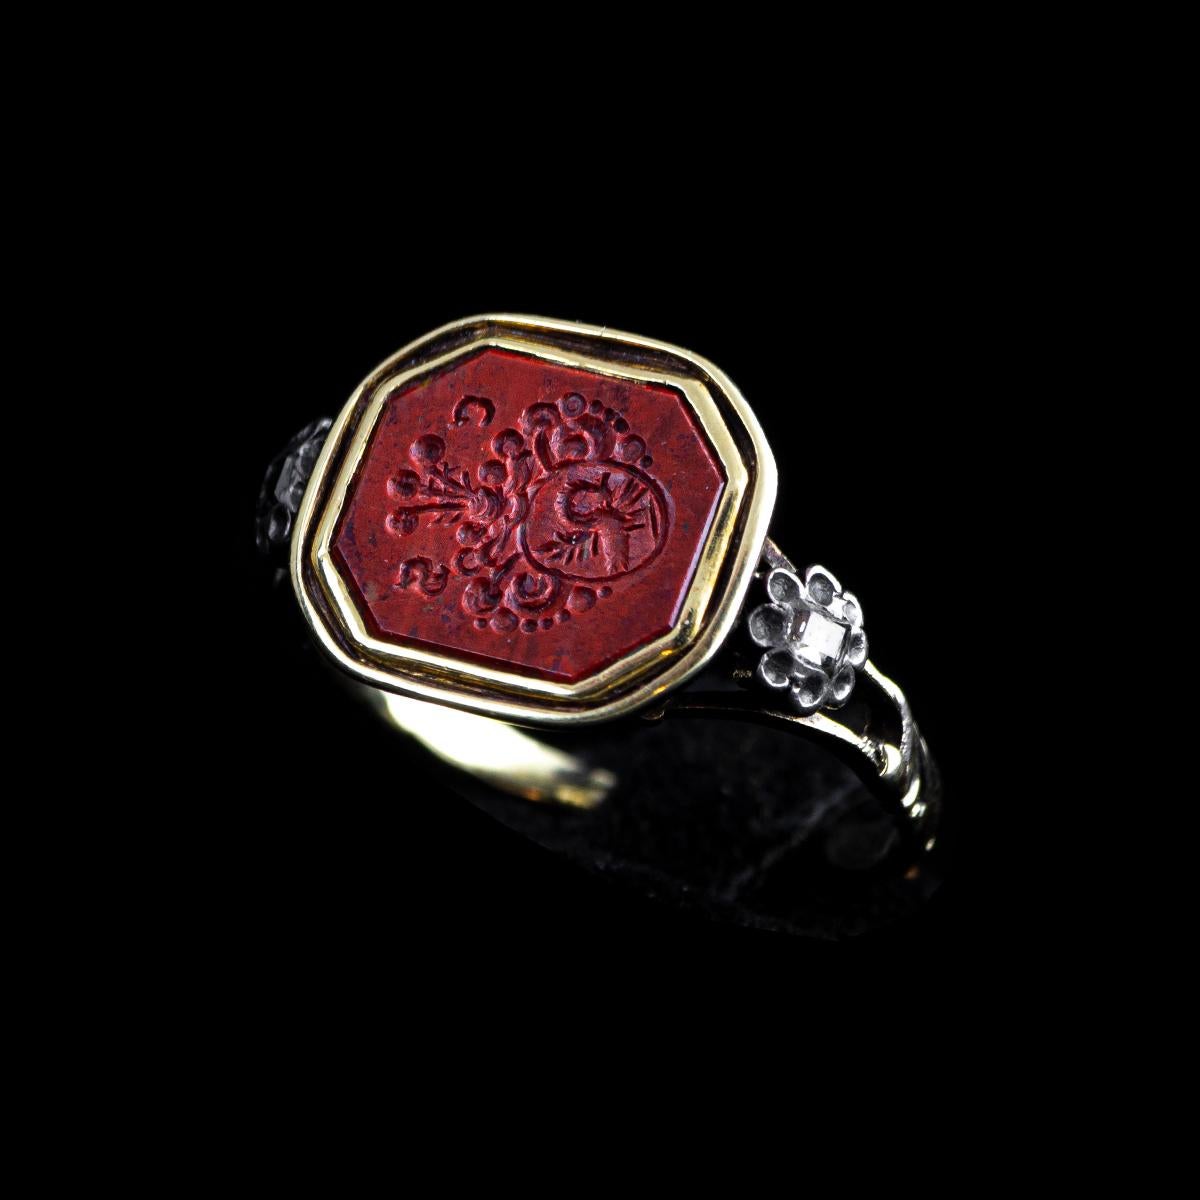 Women's 14 Kt Yellow Gold Ring with 1840s Heraldic Emblem Carved Jasper For Sale